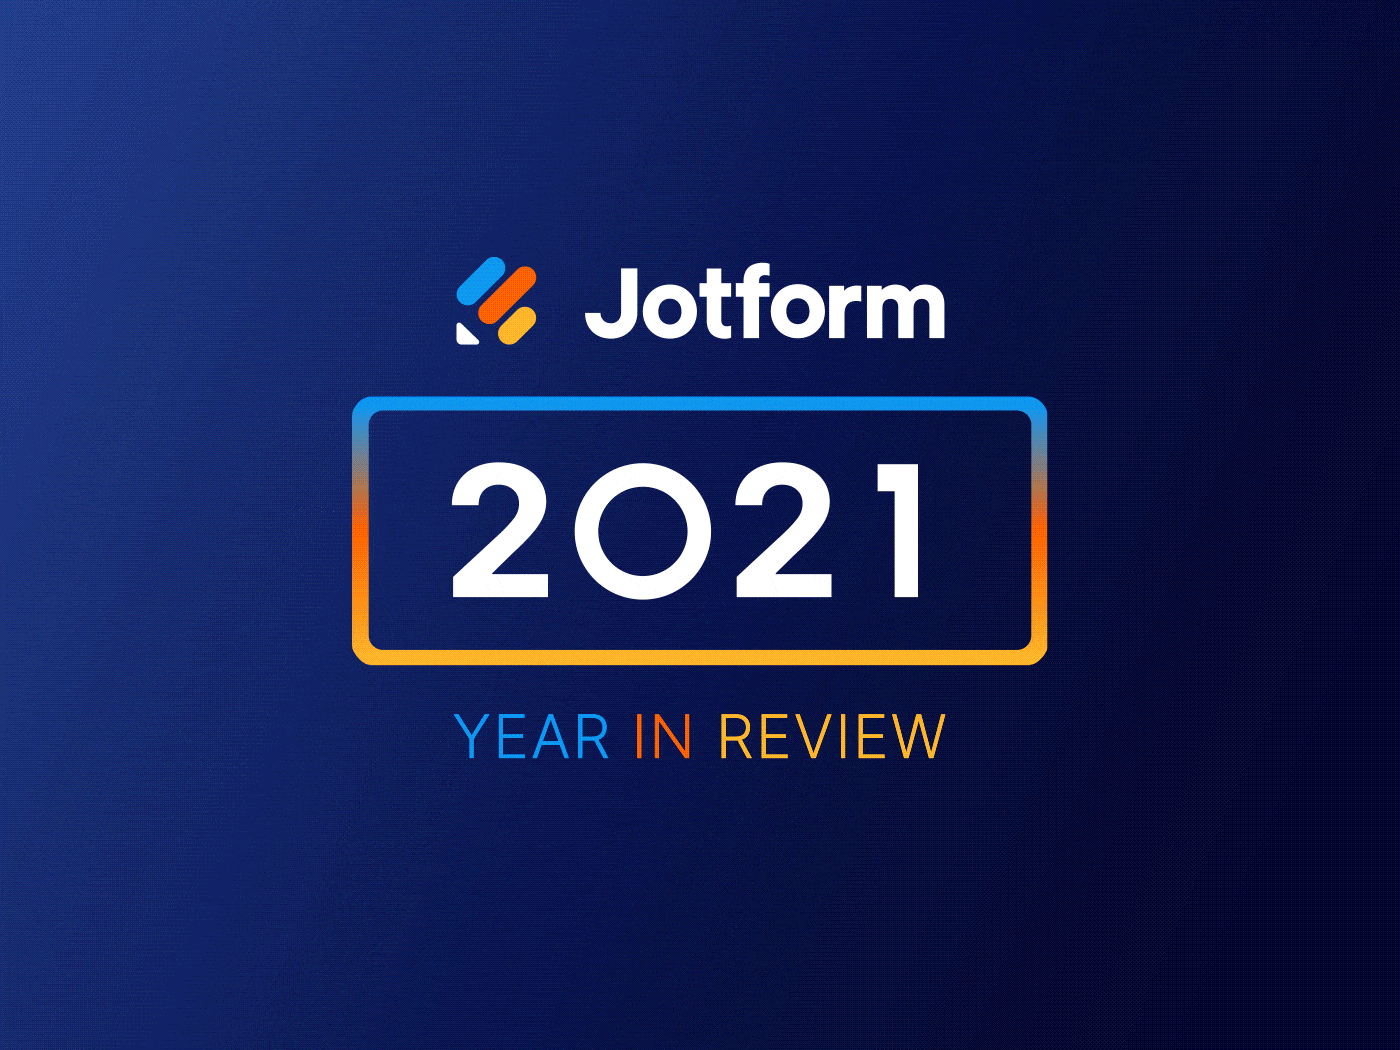 Announcing Jotform’s 2021 year in review